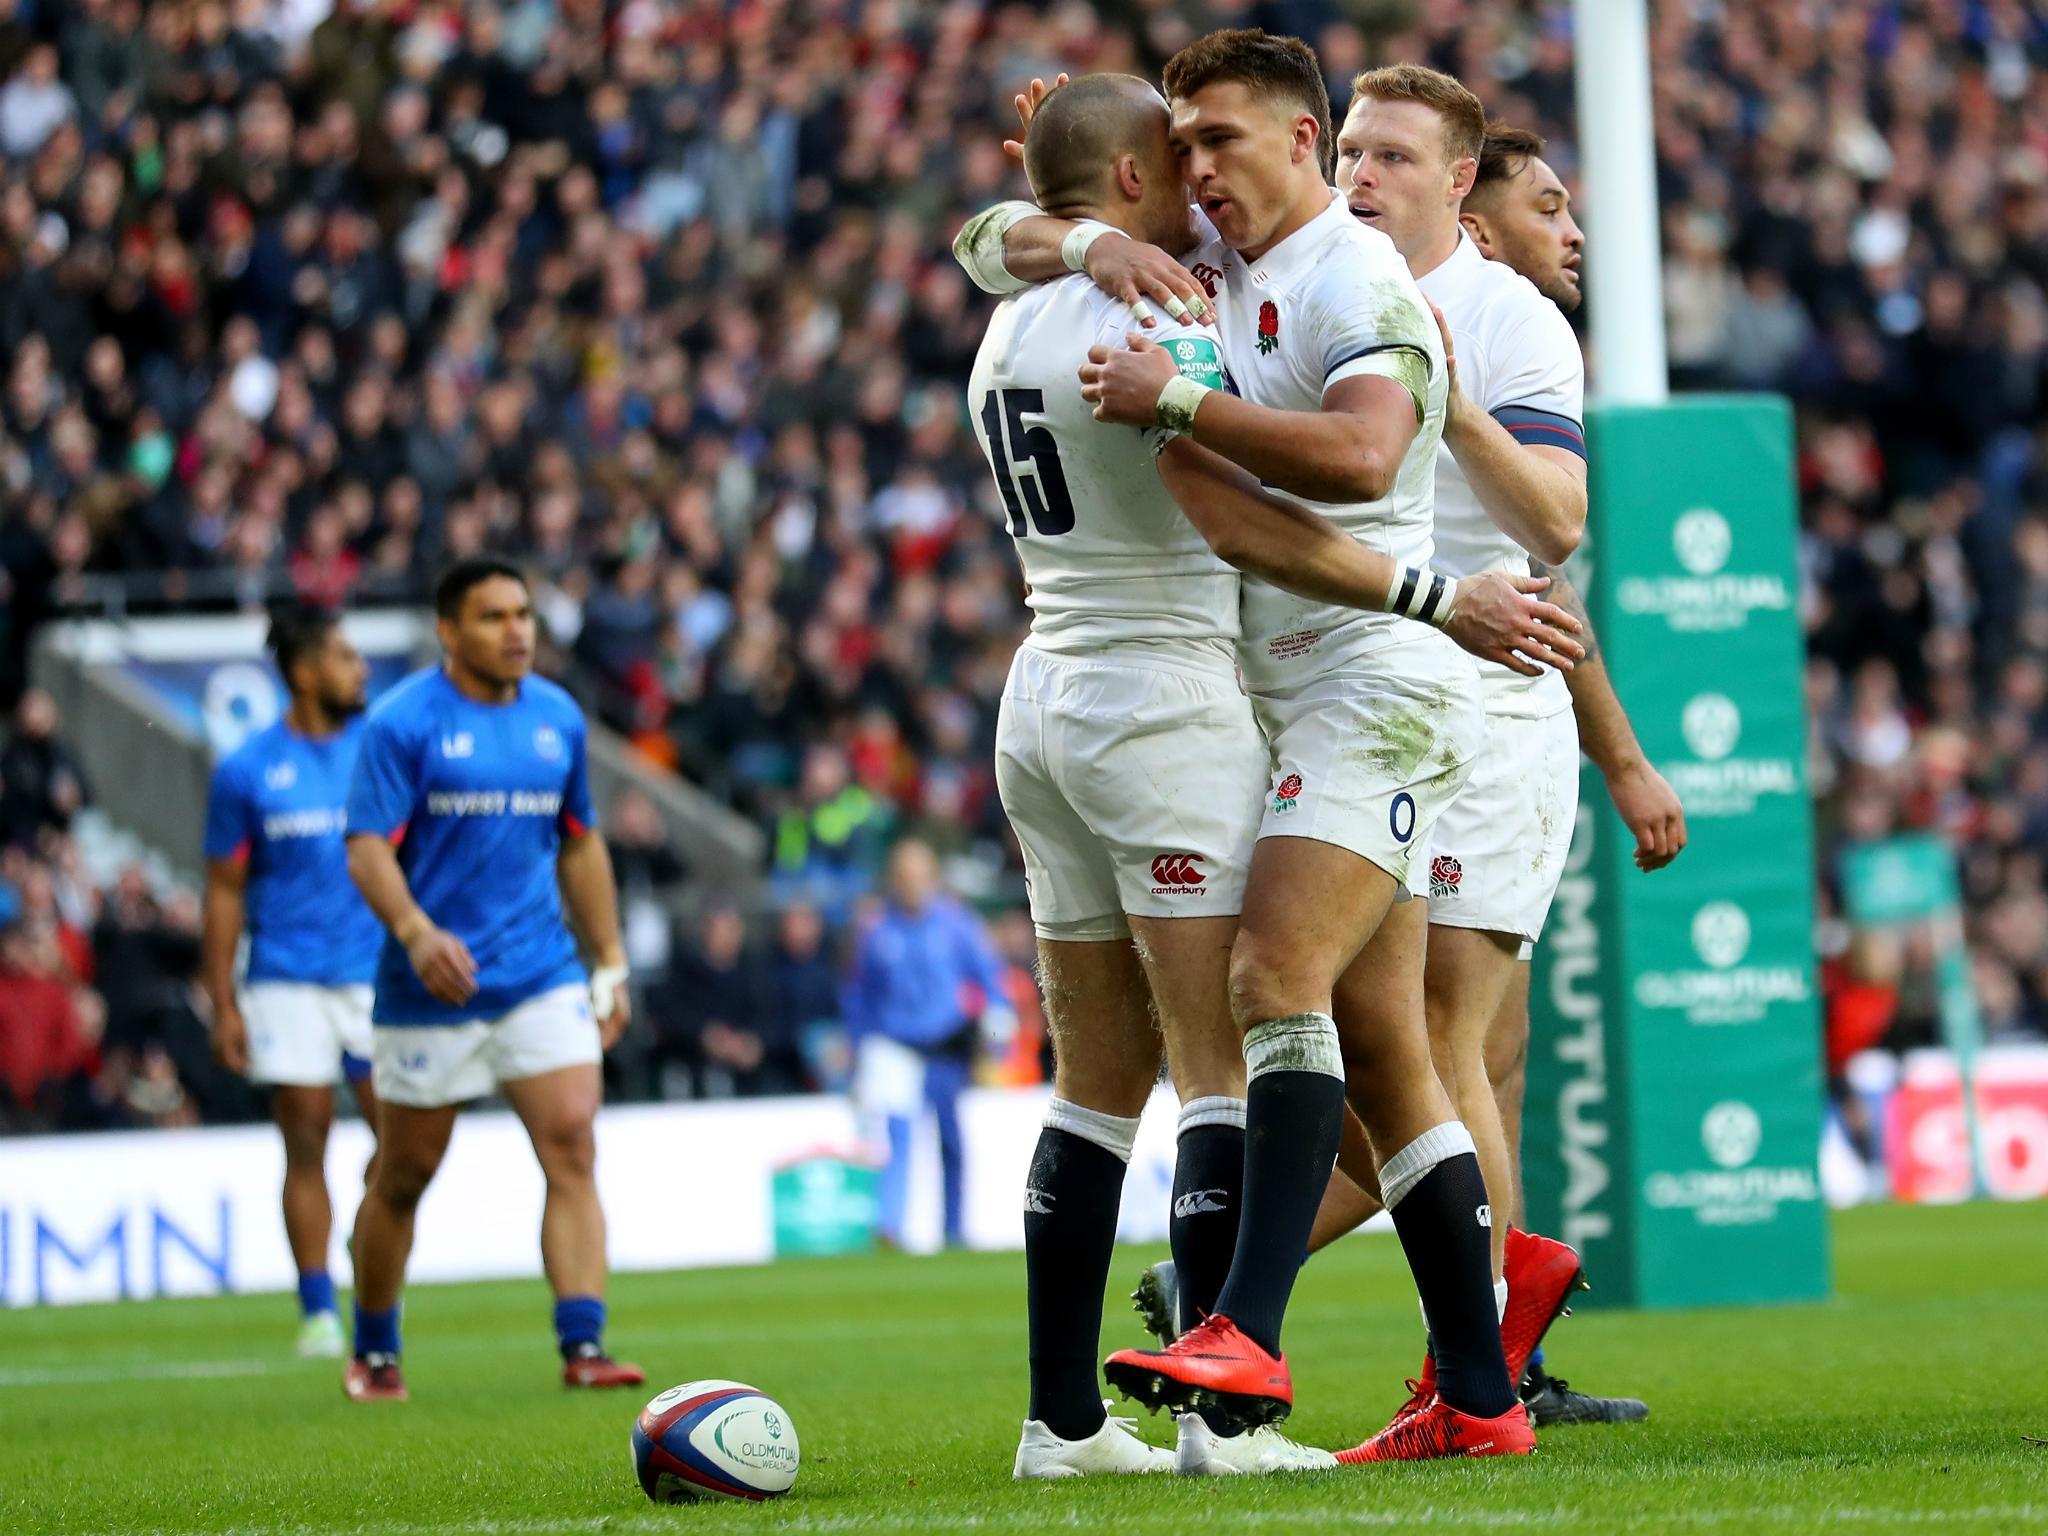 Mike Brown celebrates England's first try against Samoa